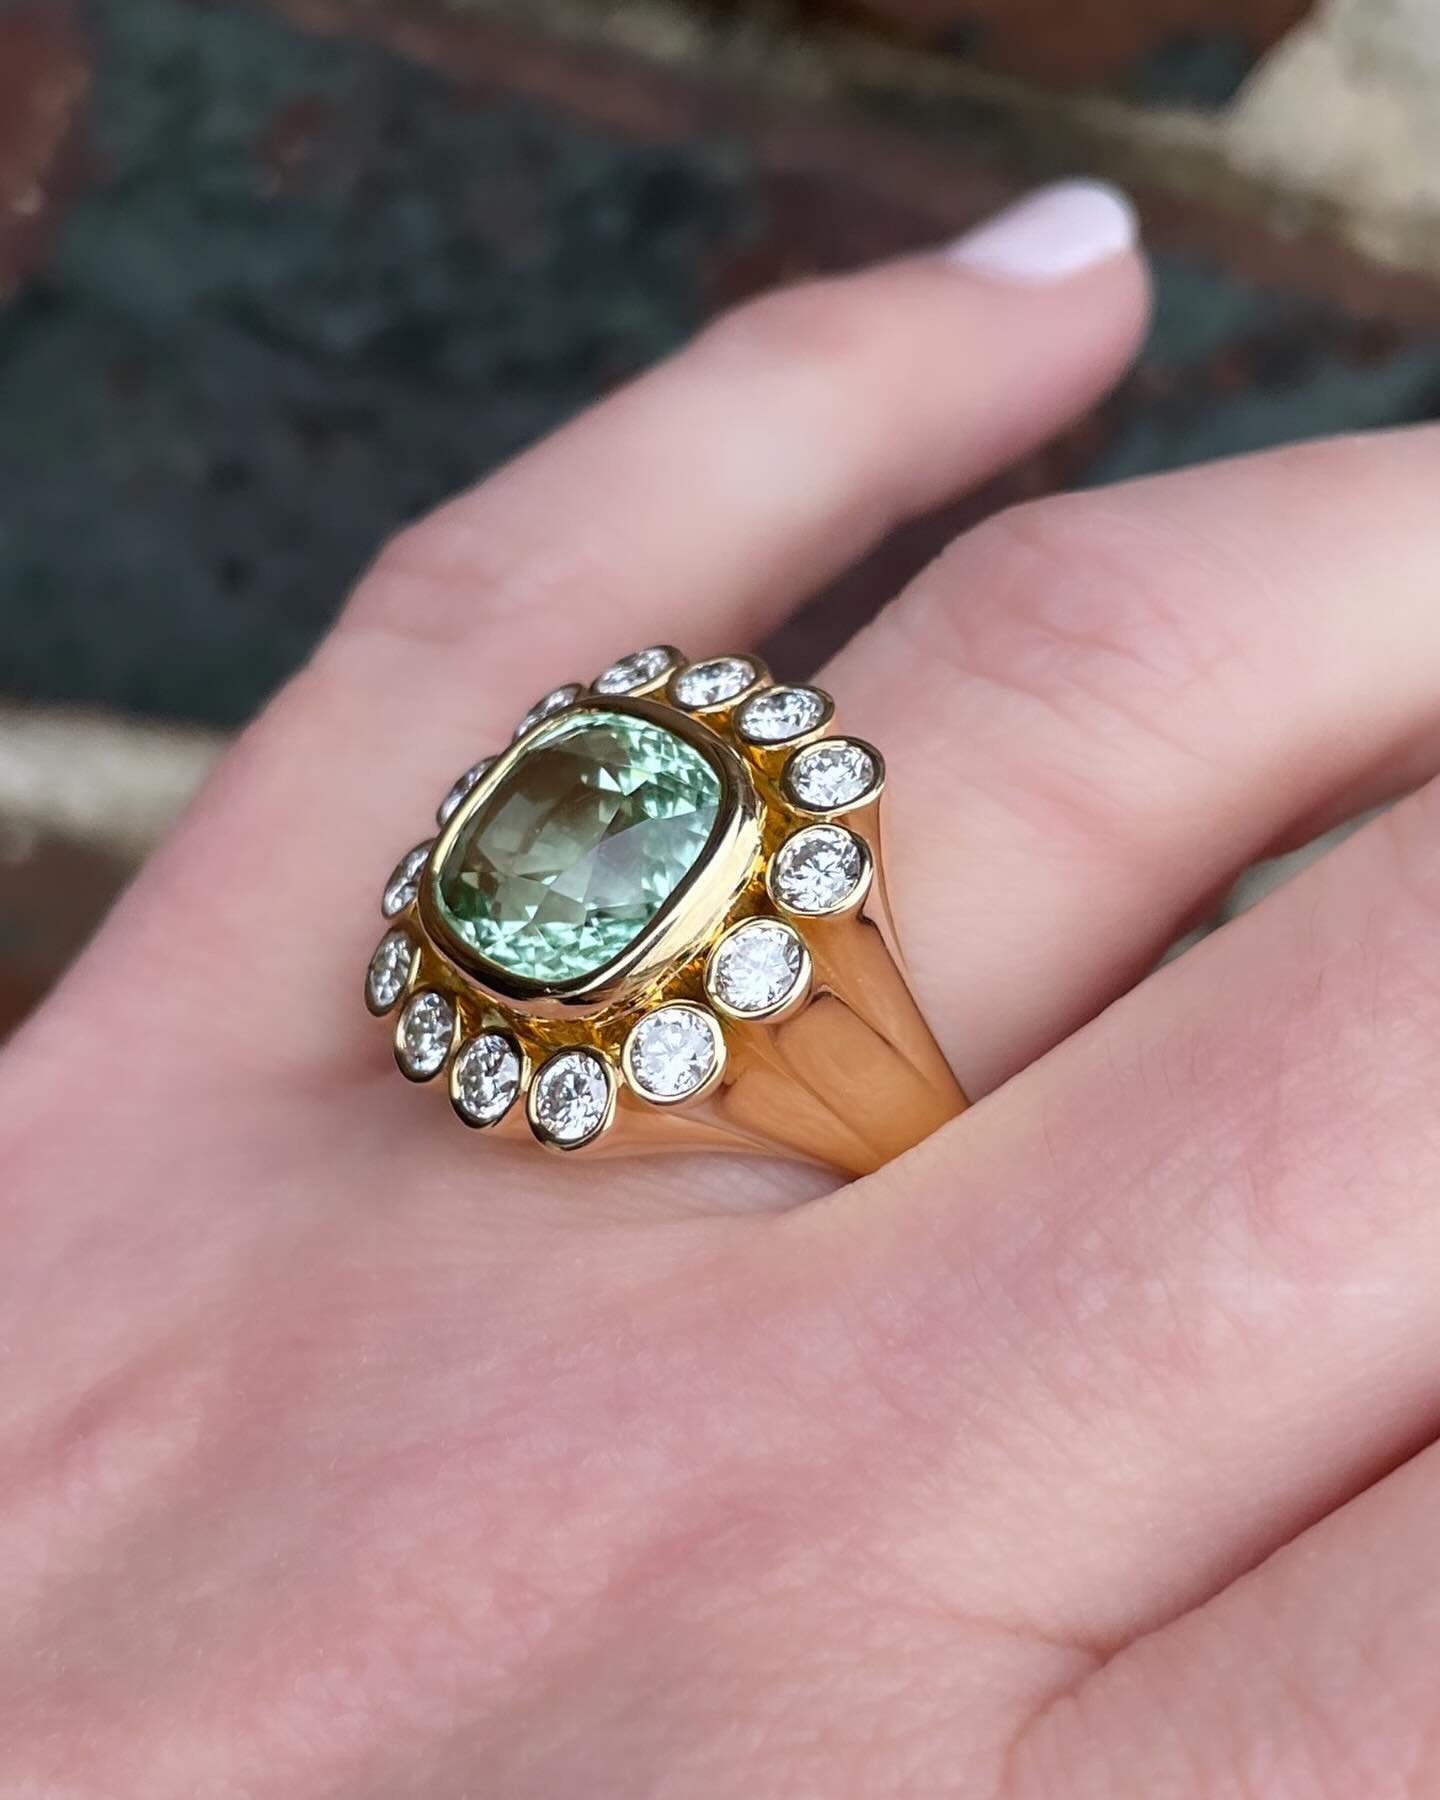 Wildflowers bloom in the spring and I&rsquo;d say we have the most beautiful of them all! This one of a kind @brentnealejewelry cushion mint green tourmaline and diamond ring can be found in store along with so many other amazing pieces at our person